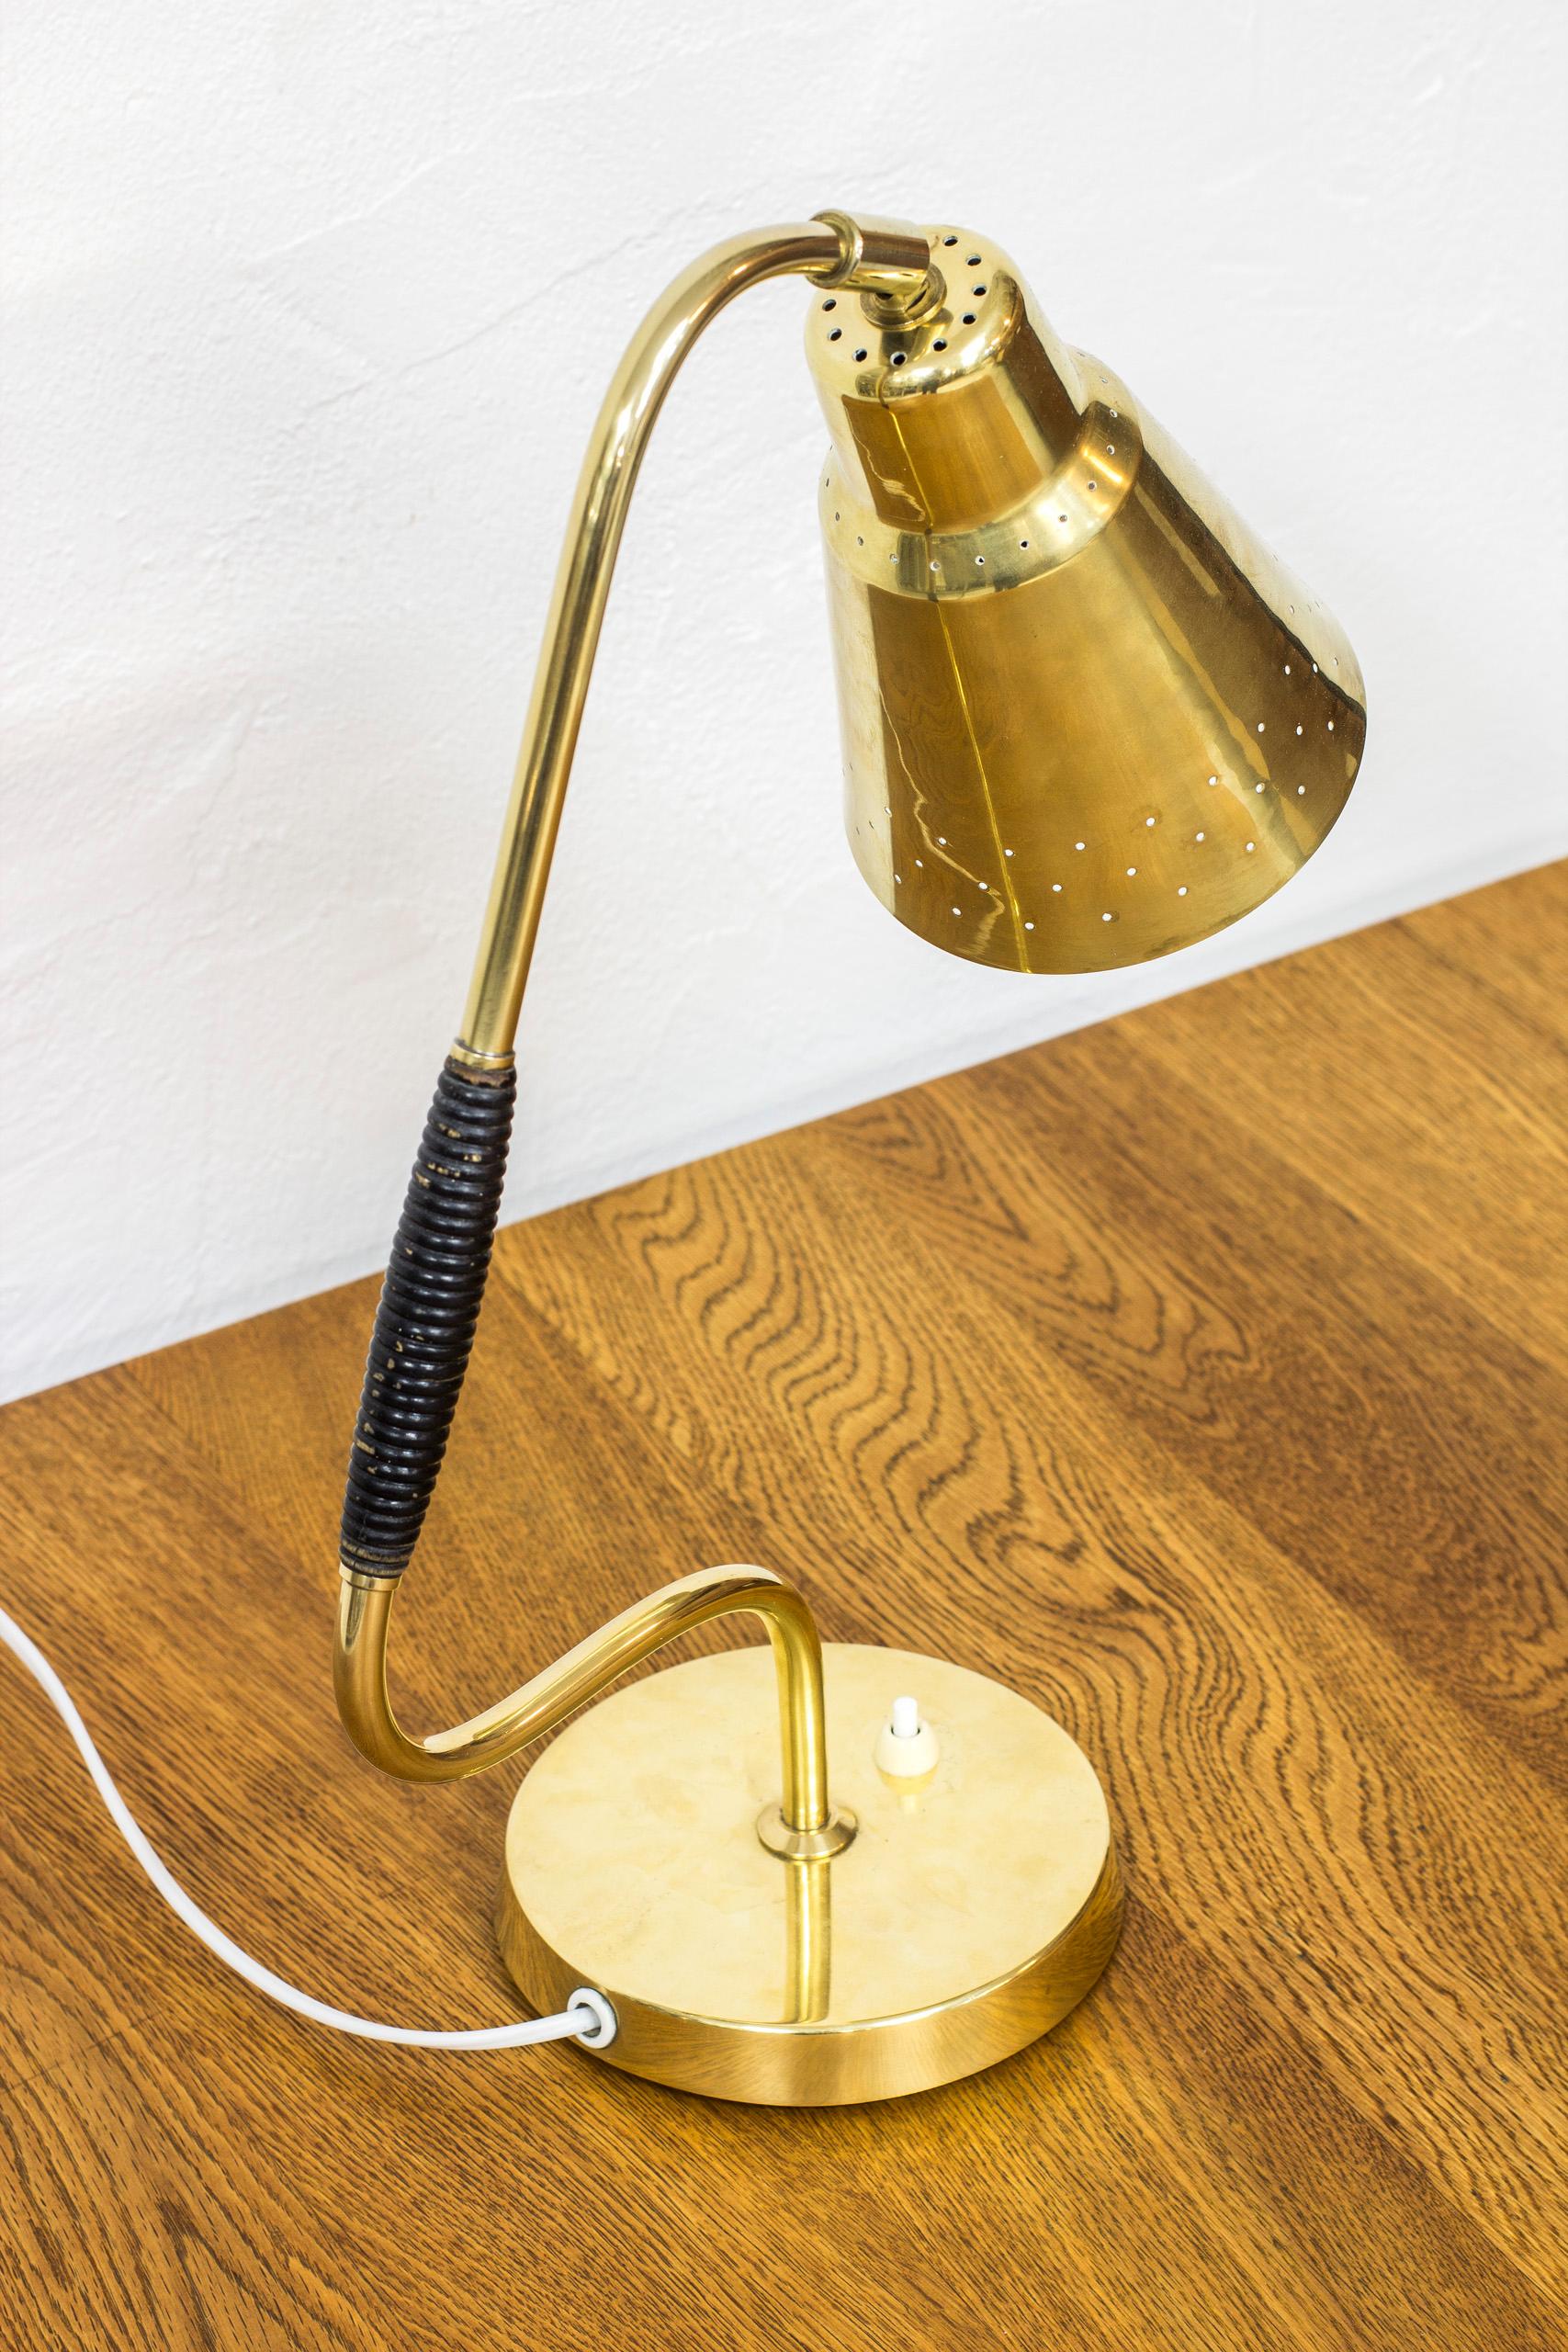 Table lamp produced by Swedish company Bergboms during the 1950s. Attributed to Eje Ahlgren. Made from solid polished brass and lacquered vine/rattan handle. Perforated, adjustable lamp shade. Light switch in working order. Very good vintage